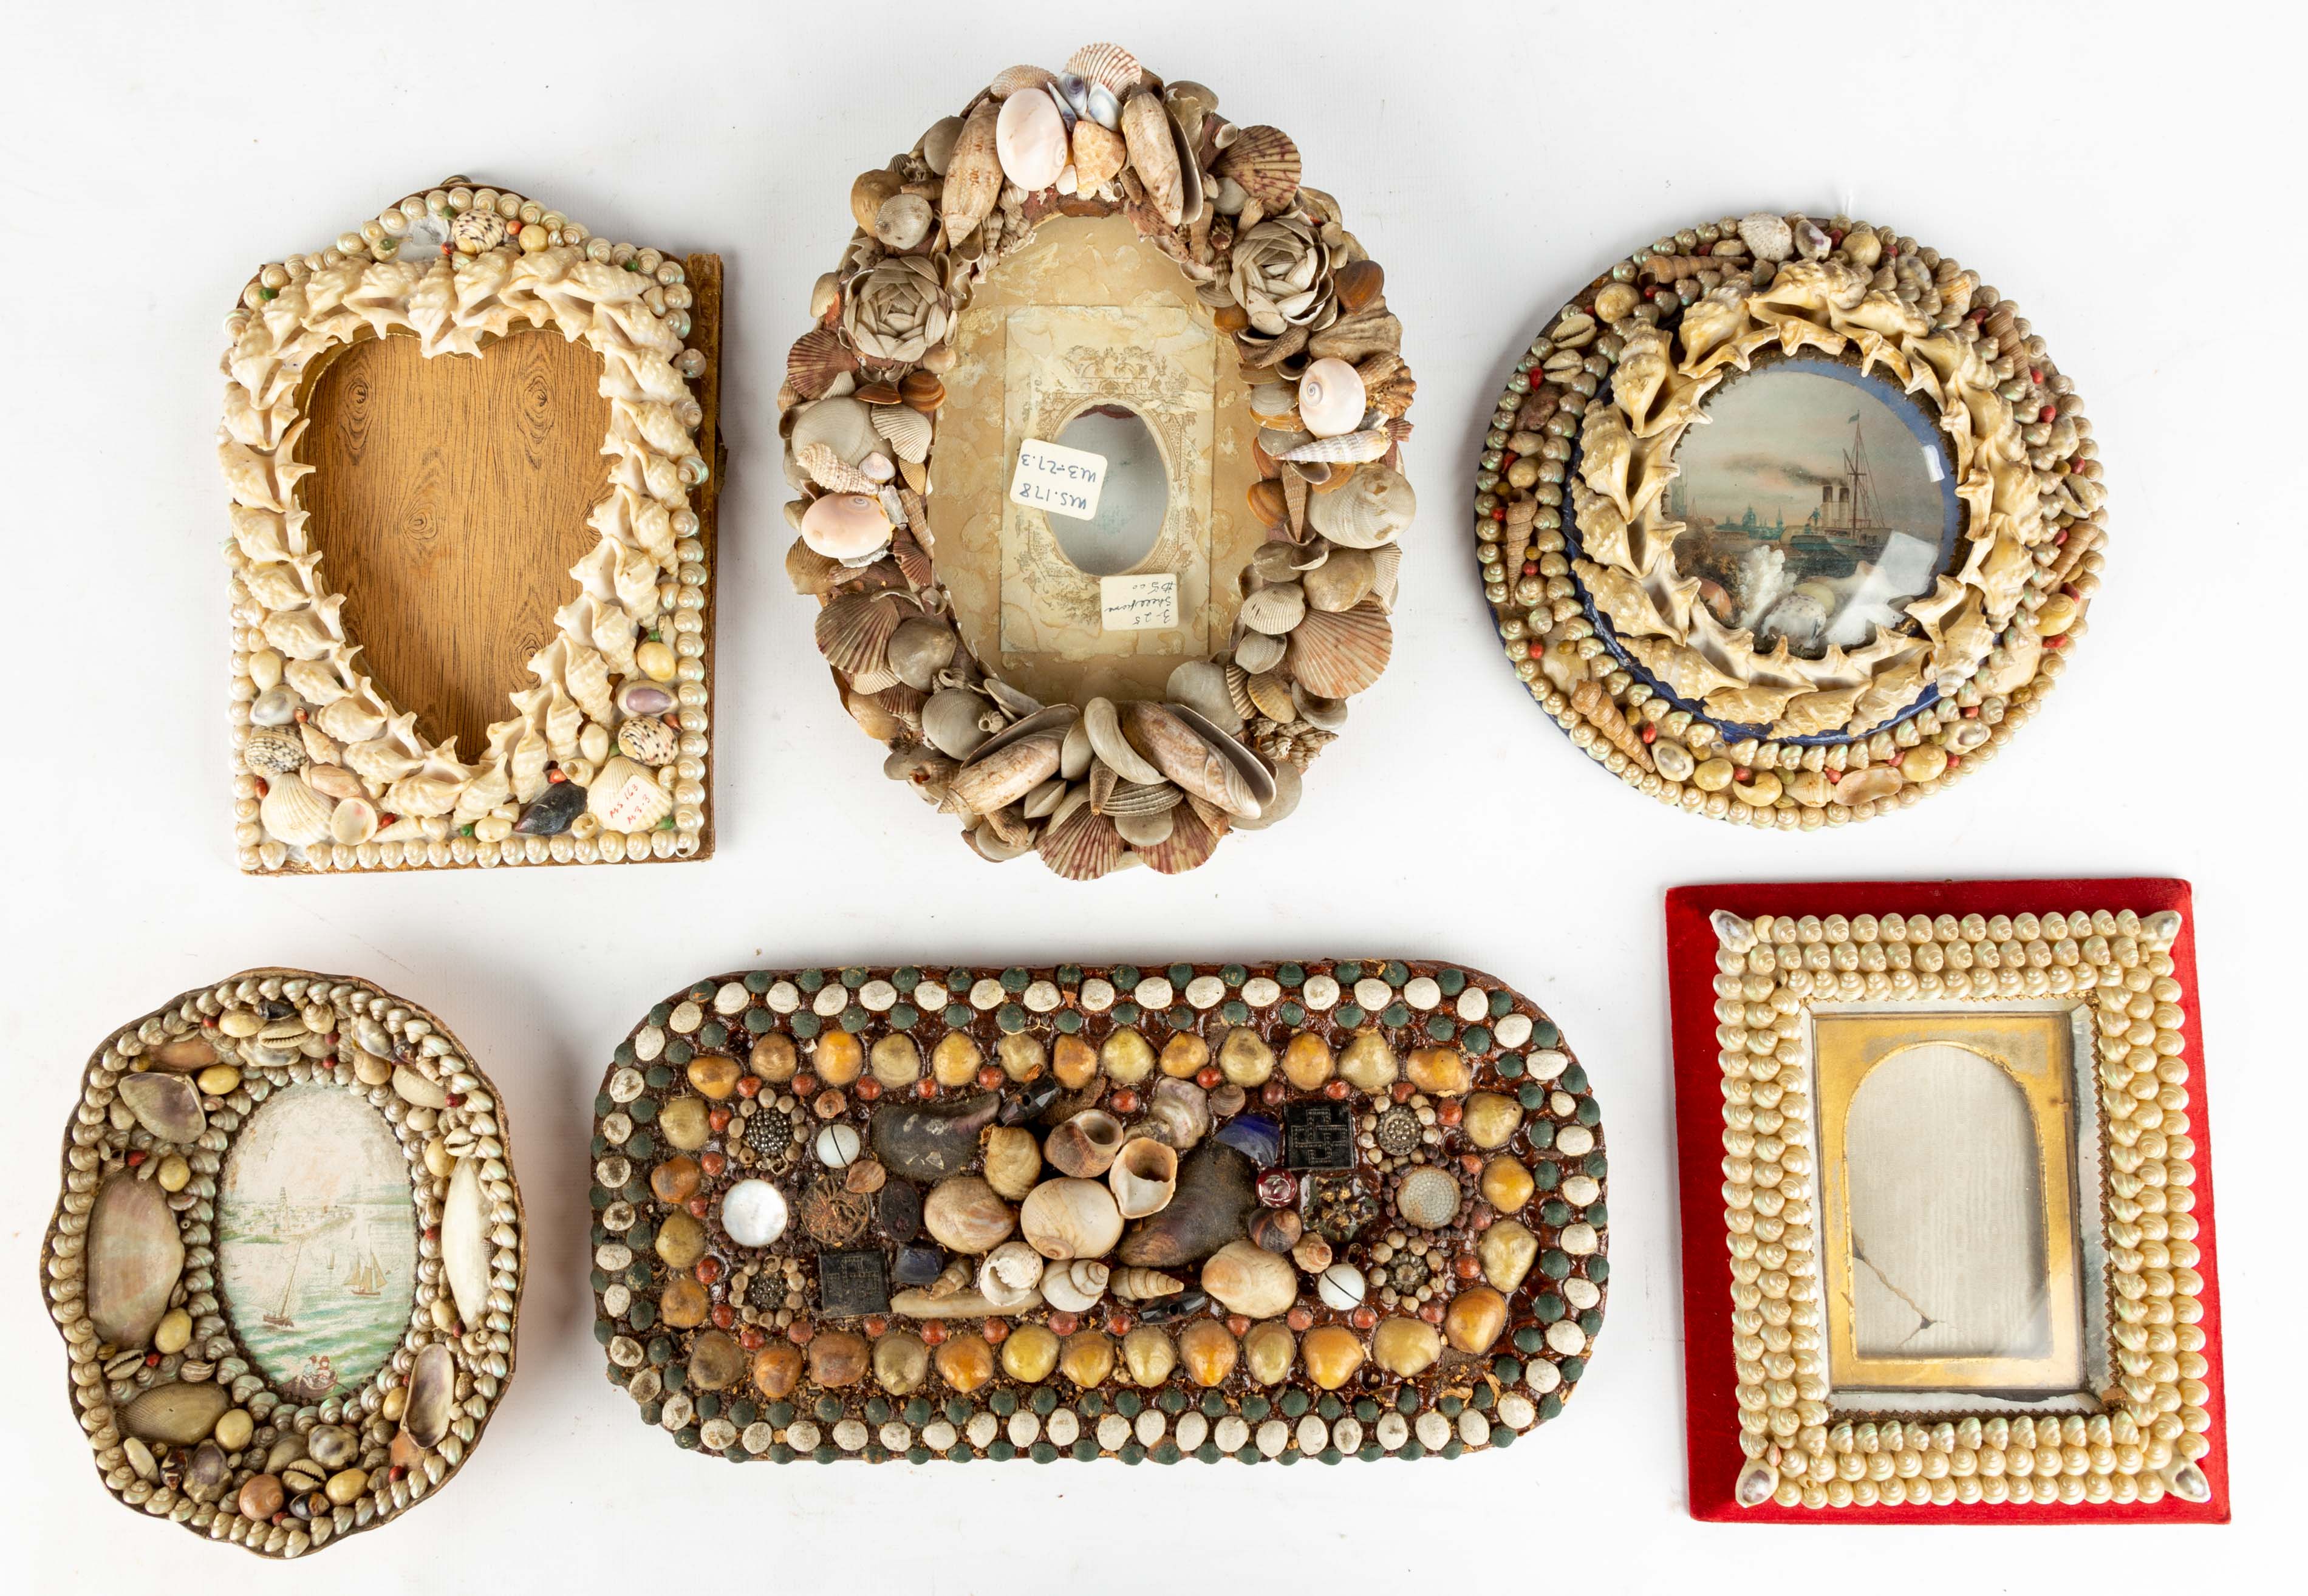 ANTIQUE SHELL ART PICTURE FRAME